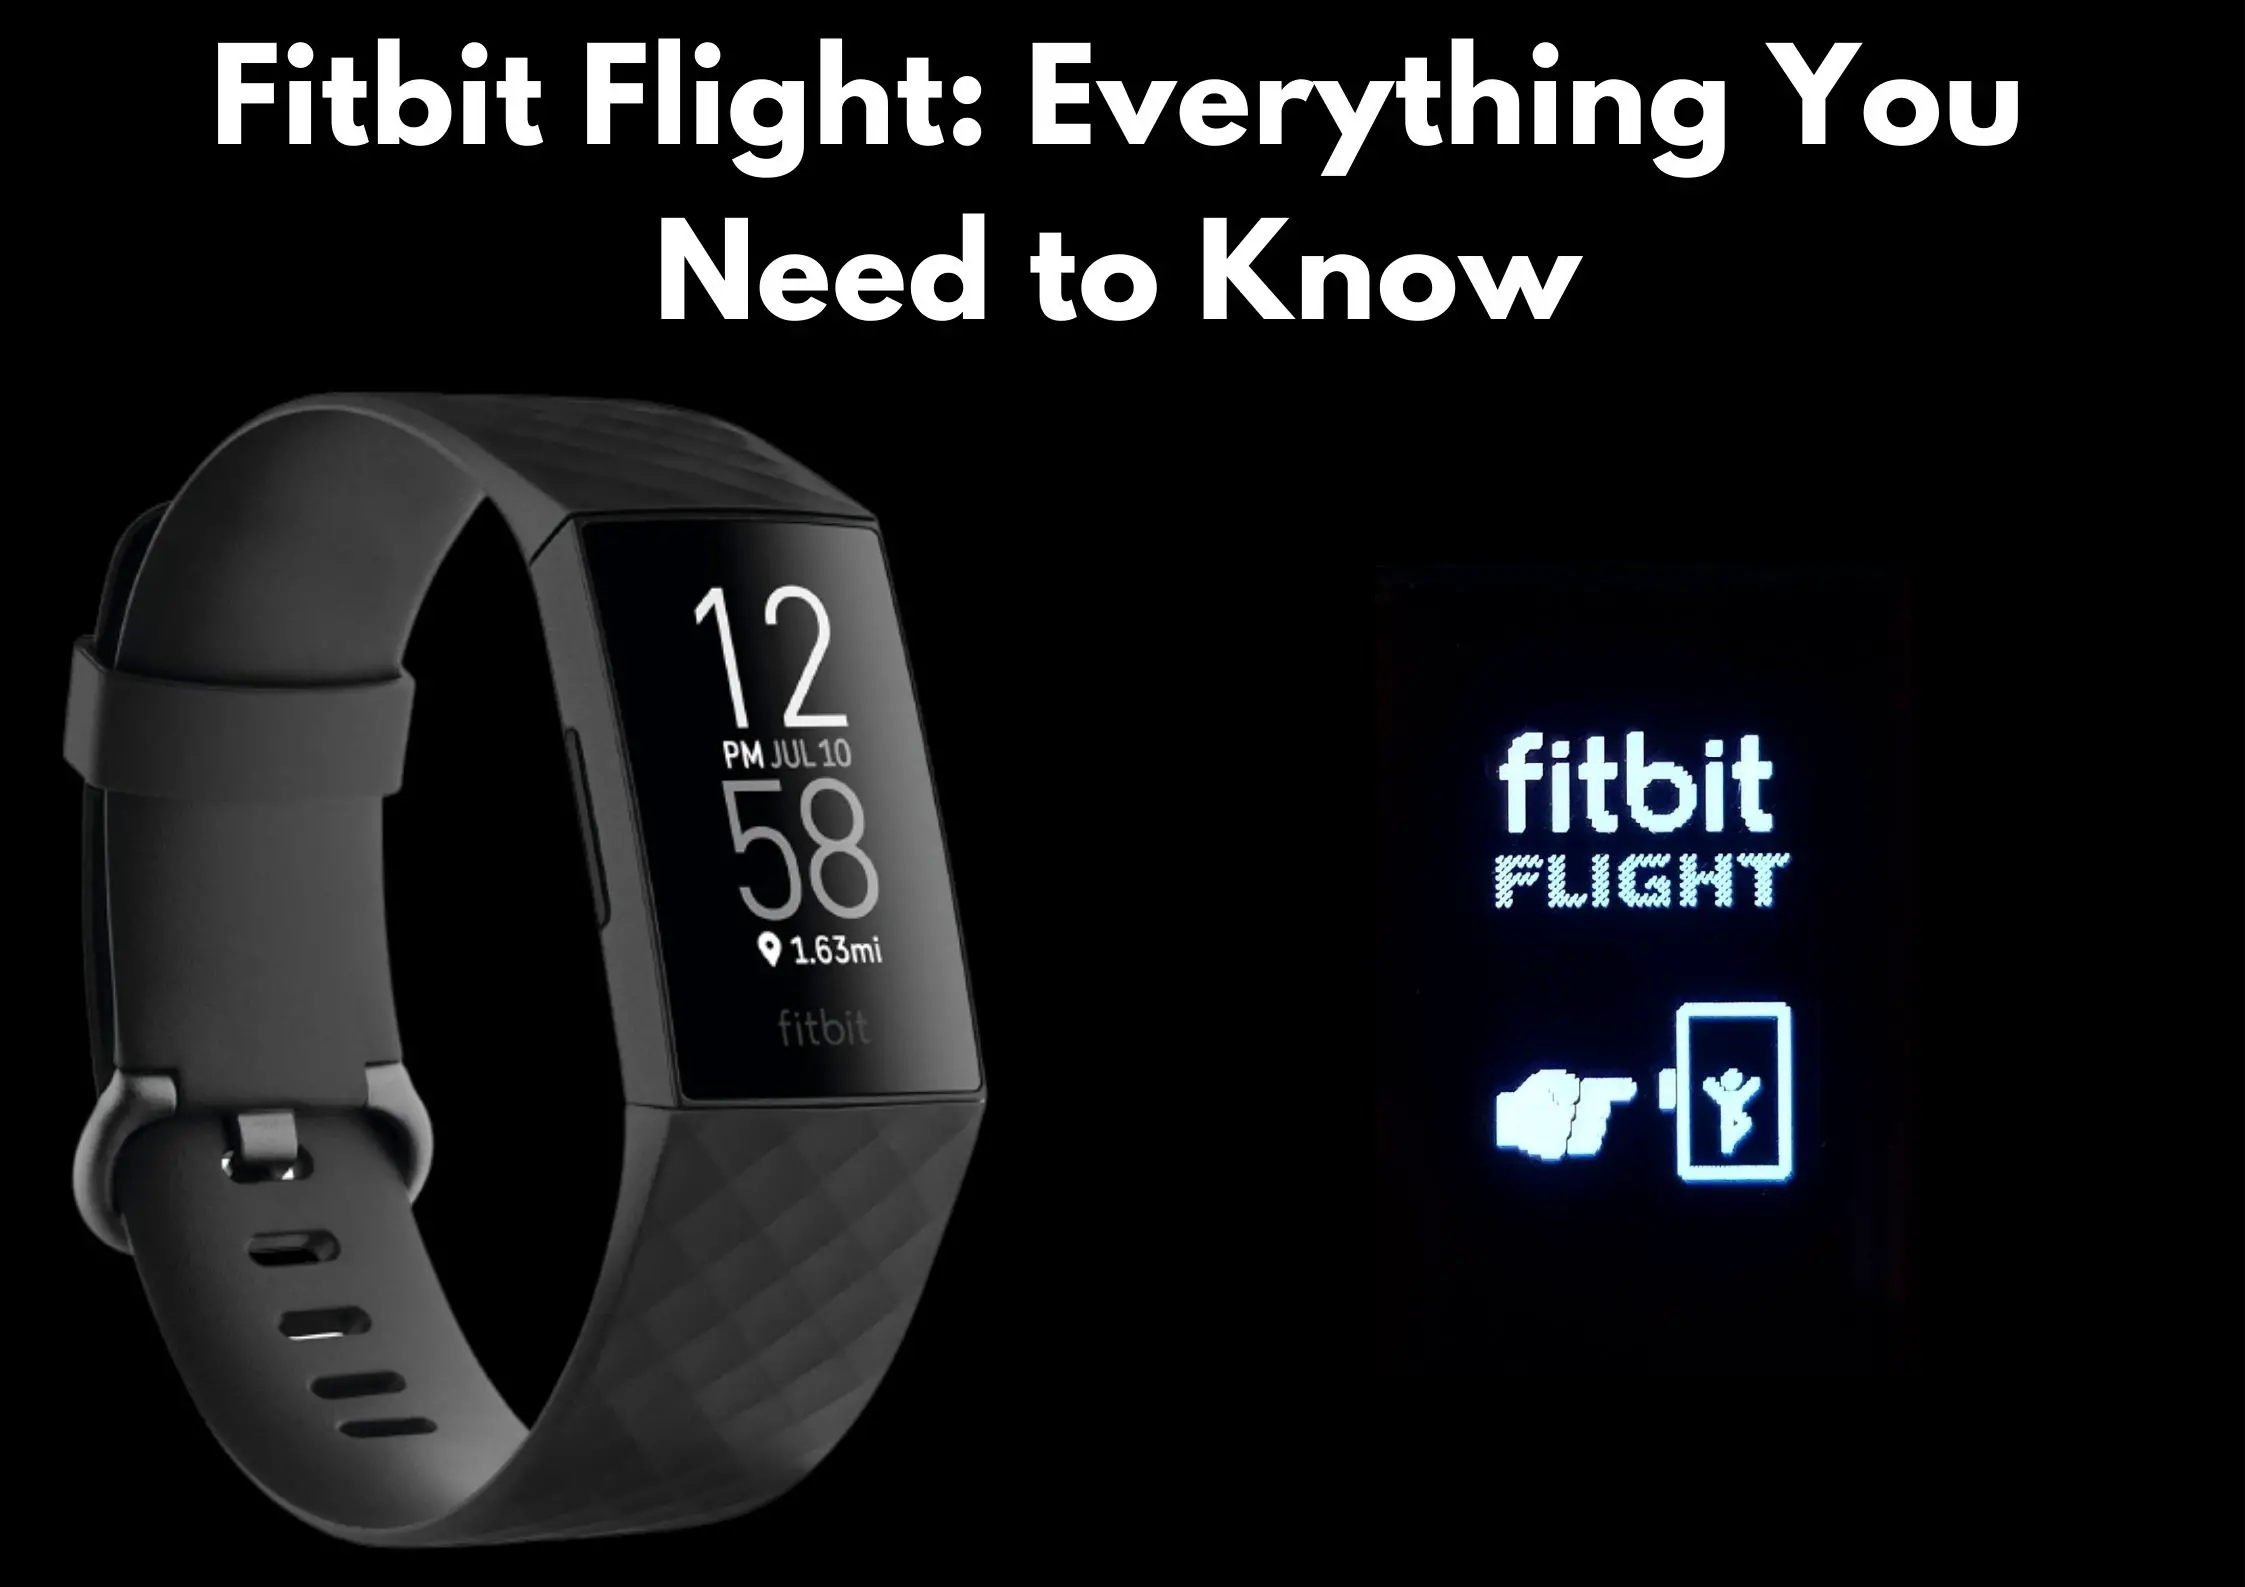 Fitbit Flight Game: All You Need to Know